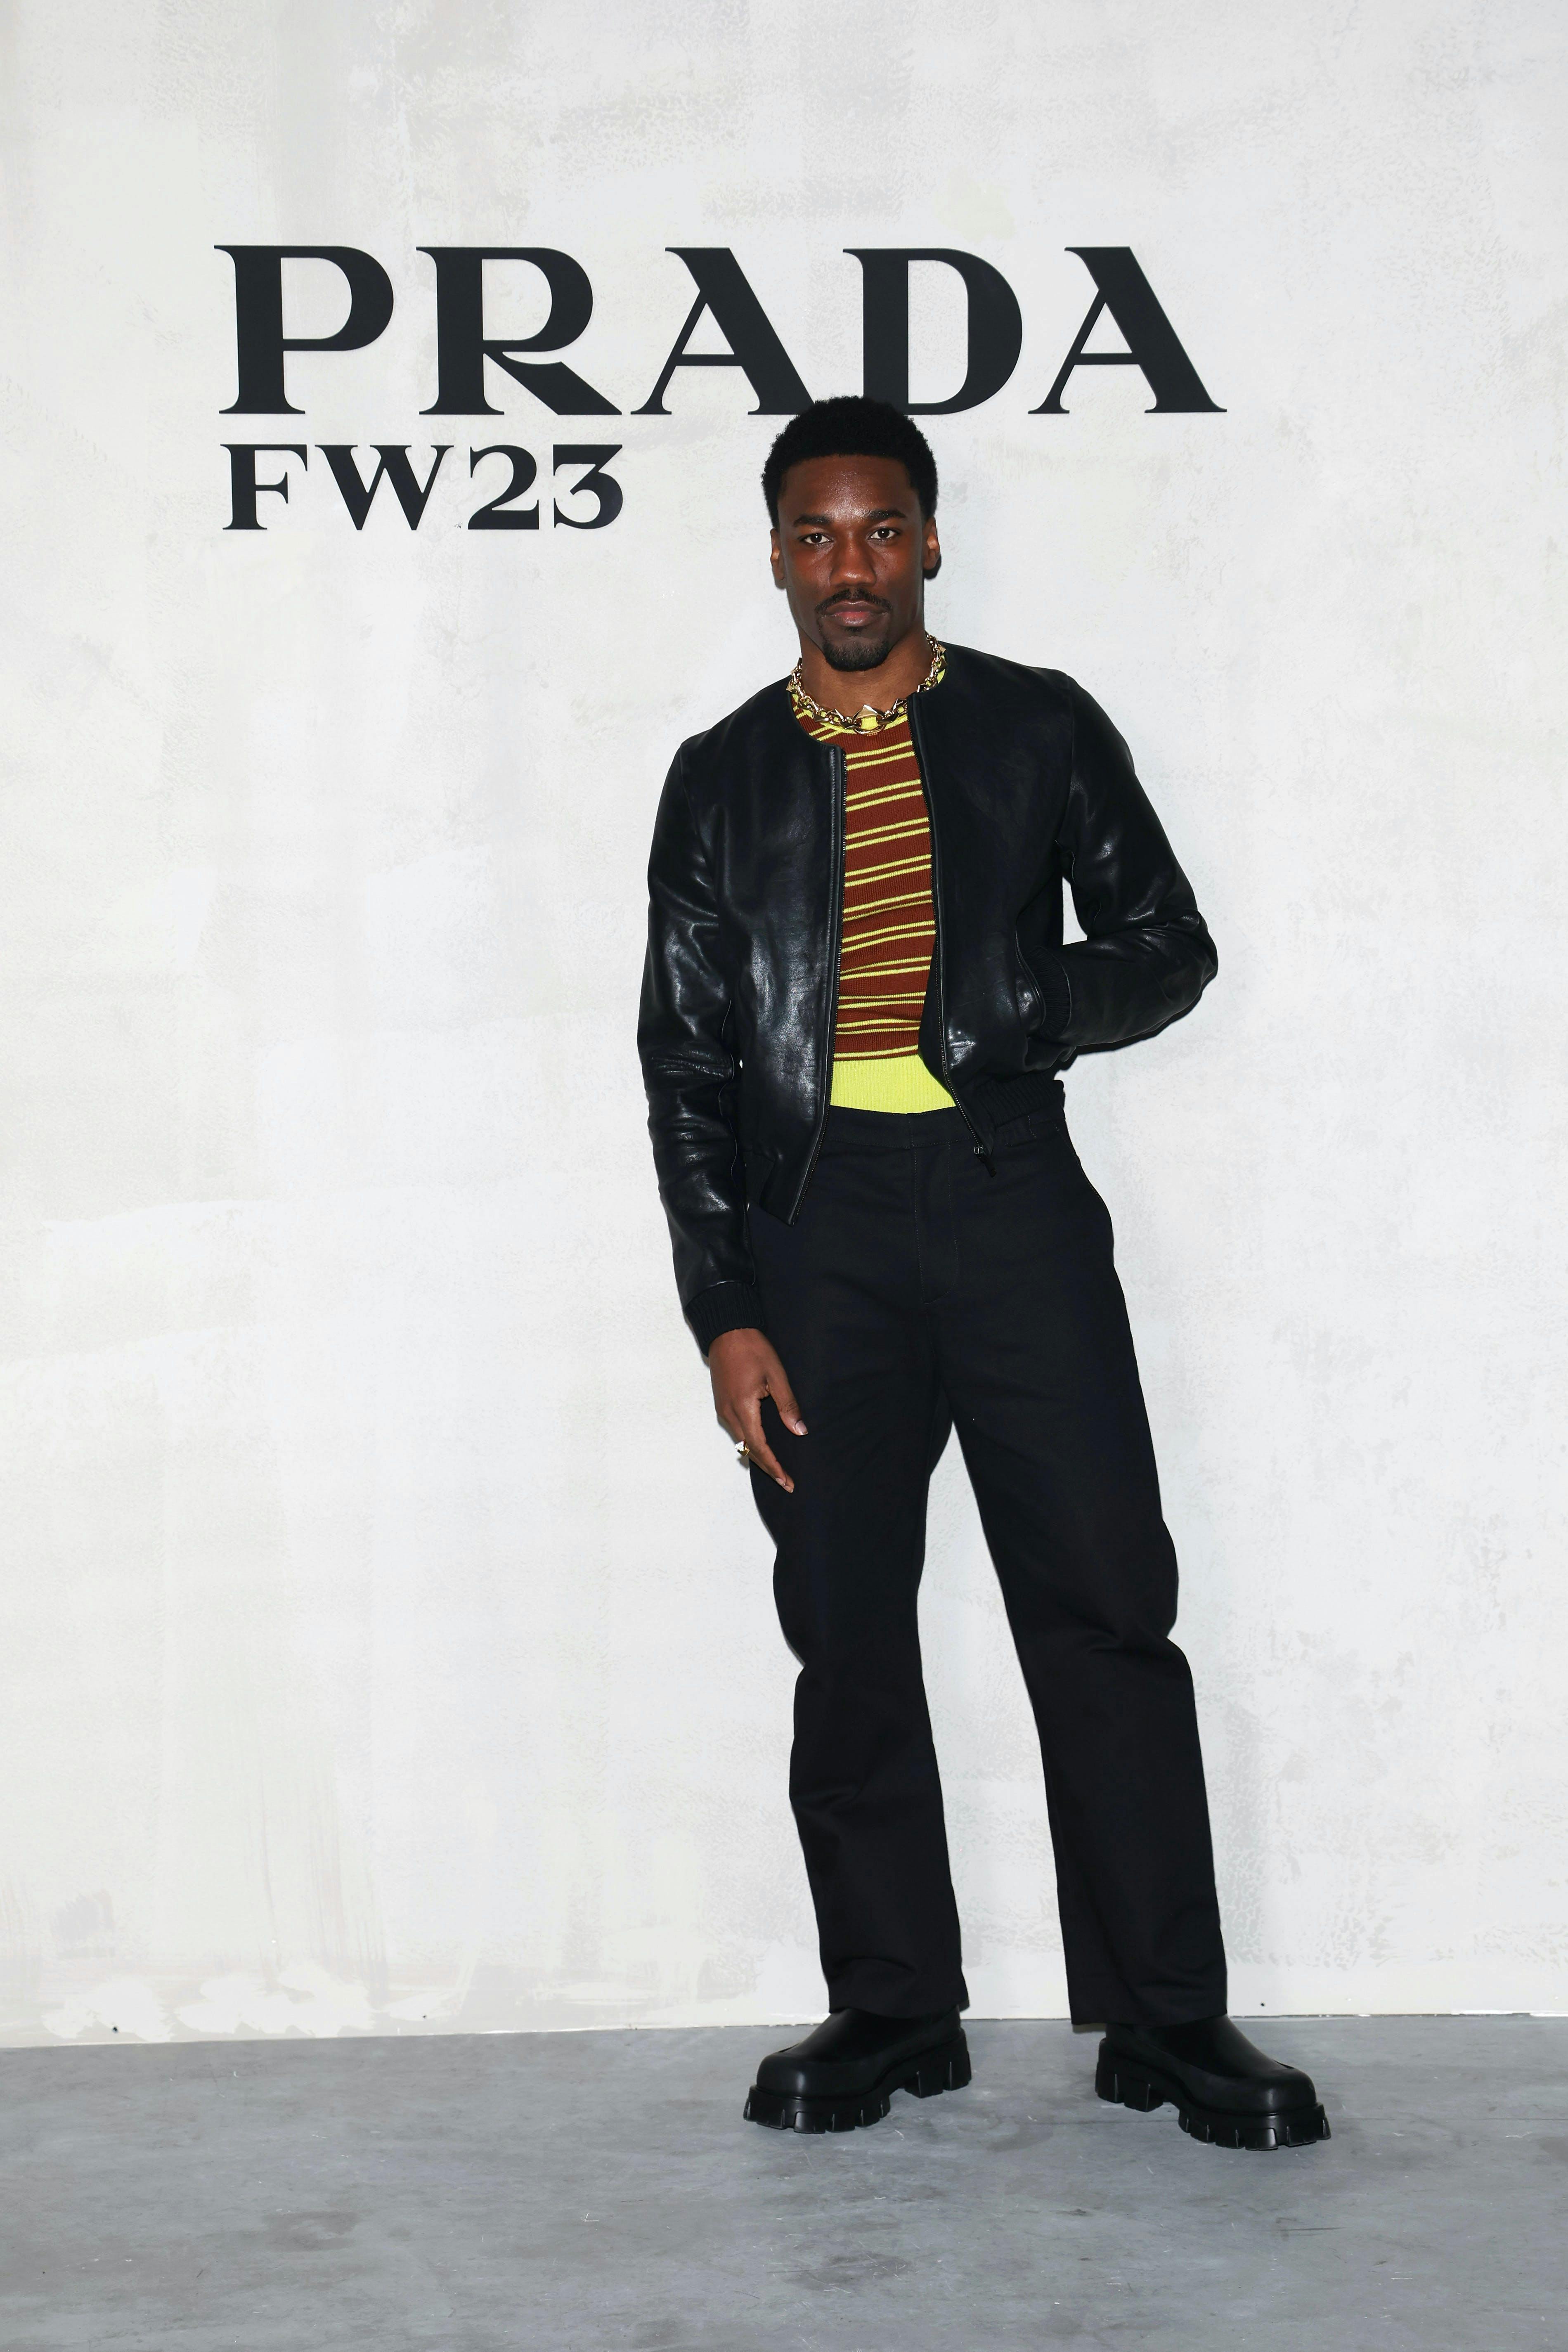 Giveon wears a yellow and red striped top with a black jacket on top and black pants as he attends the Prada show at Milan Fashion Week 2023.